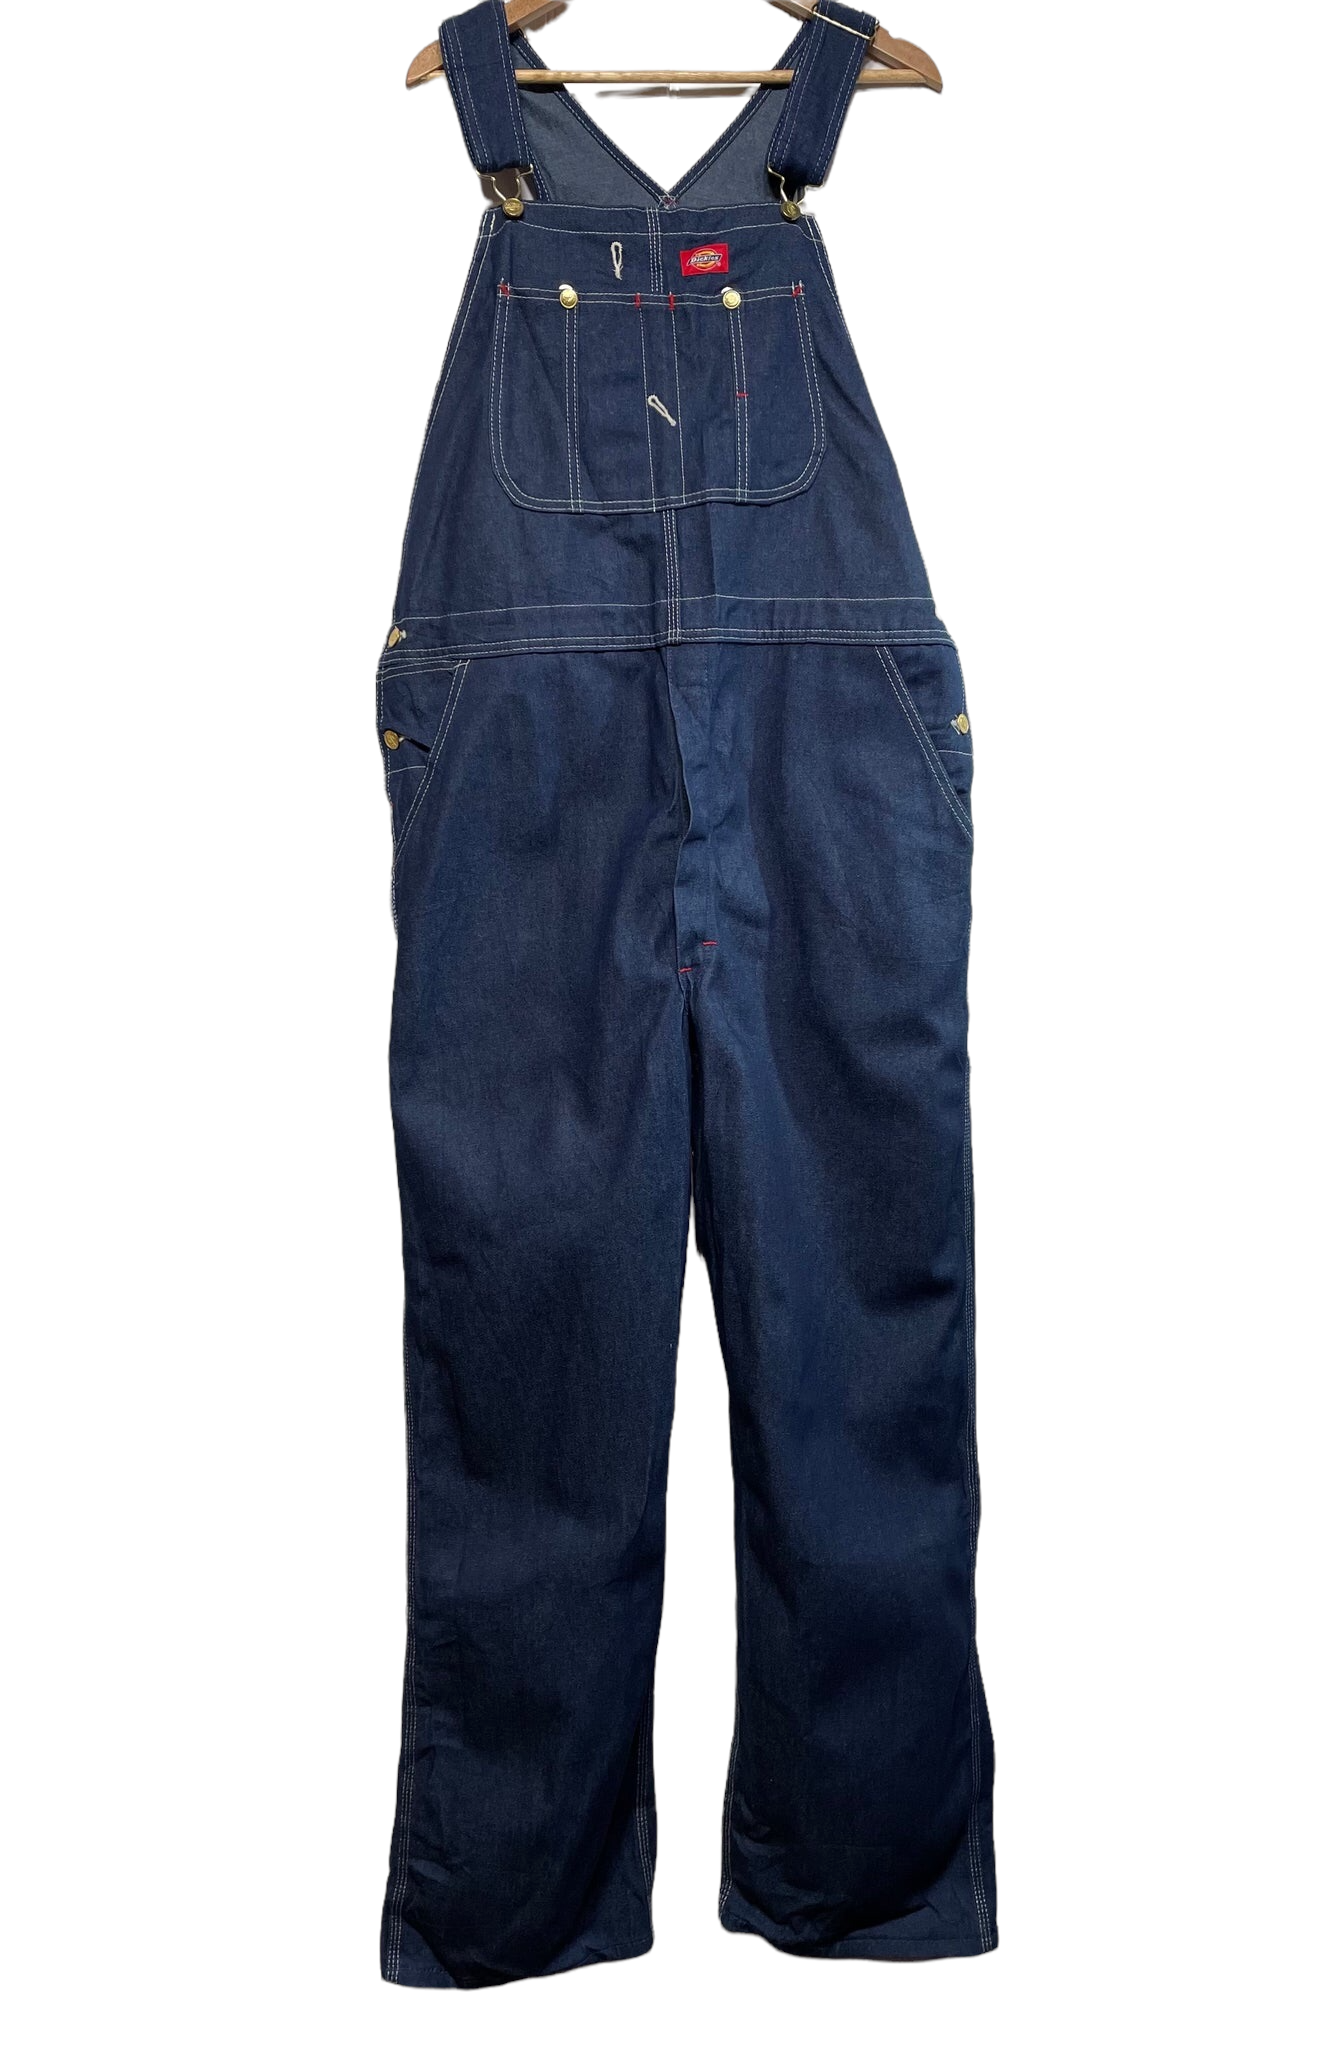 Dickies Dungarees with Contrast Stitching (Size 38X30)